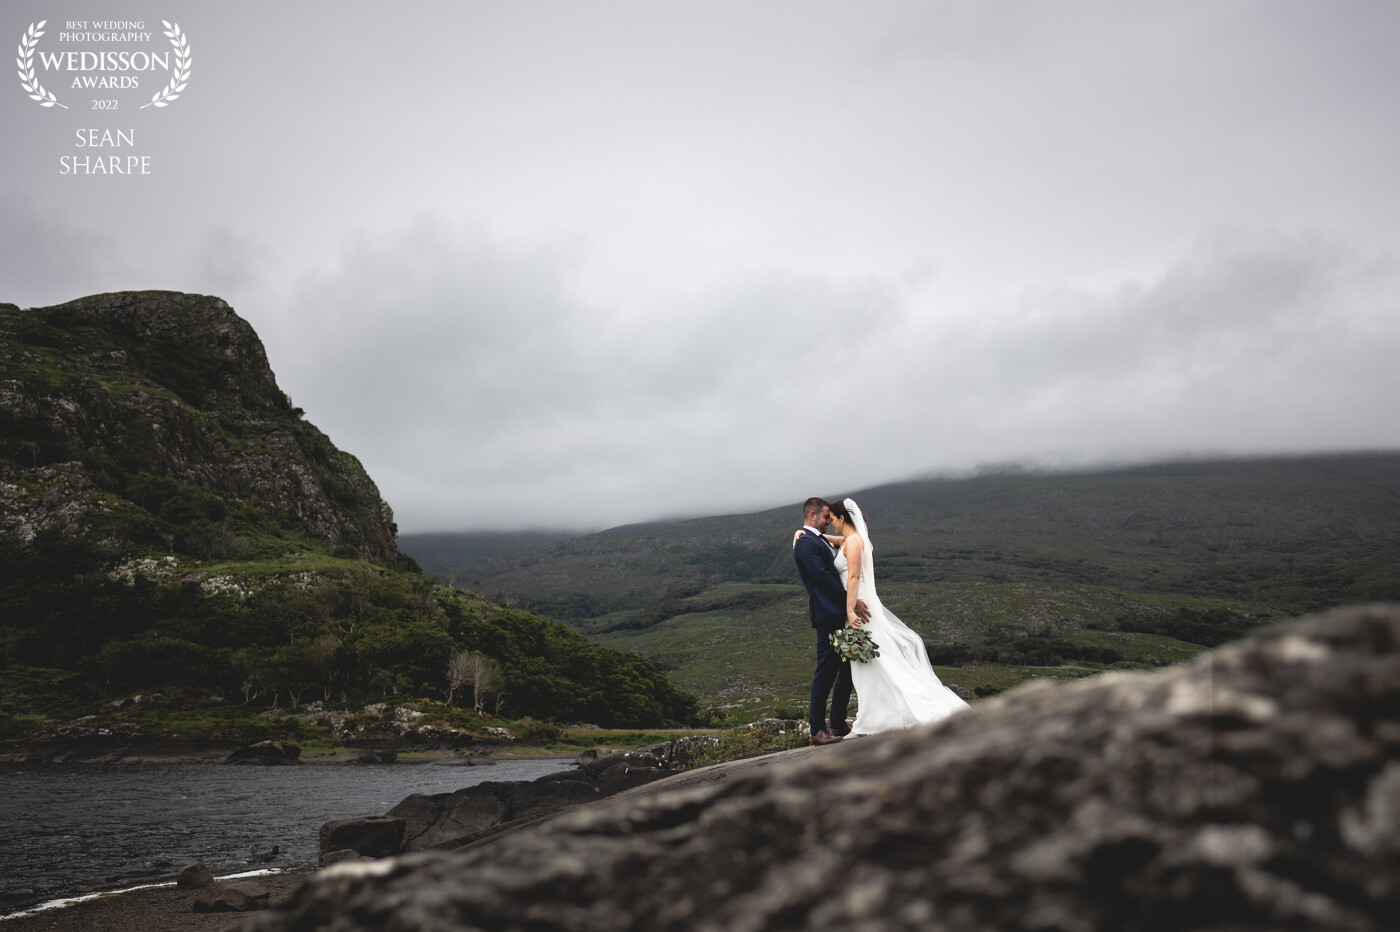 Caroline and Jack - Not often you get to photograph a best friend's wedding and this was such an amazing experience. Taken in the beautiful backdrop of Killarney National Park. July 2022.